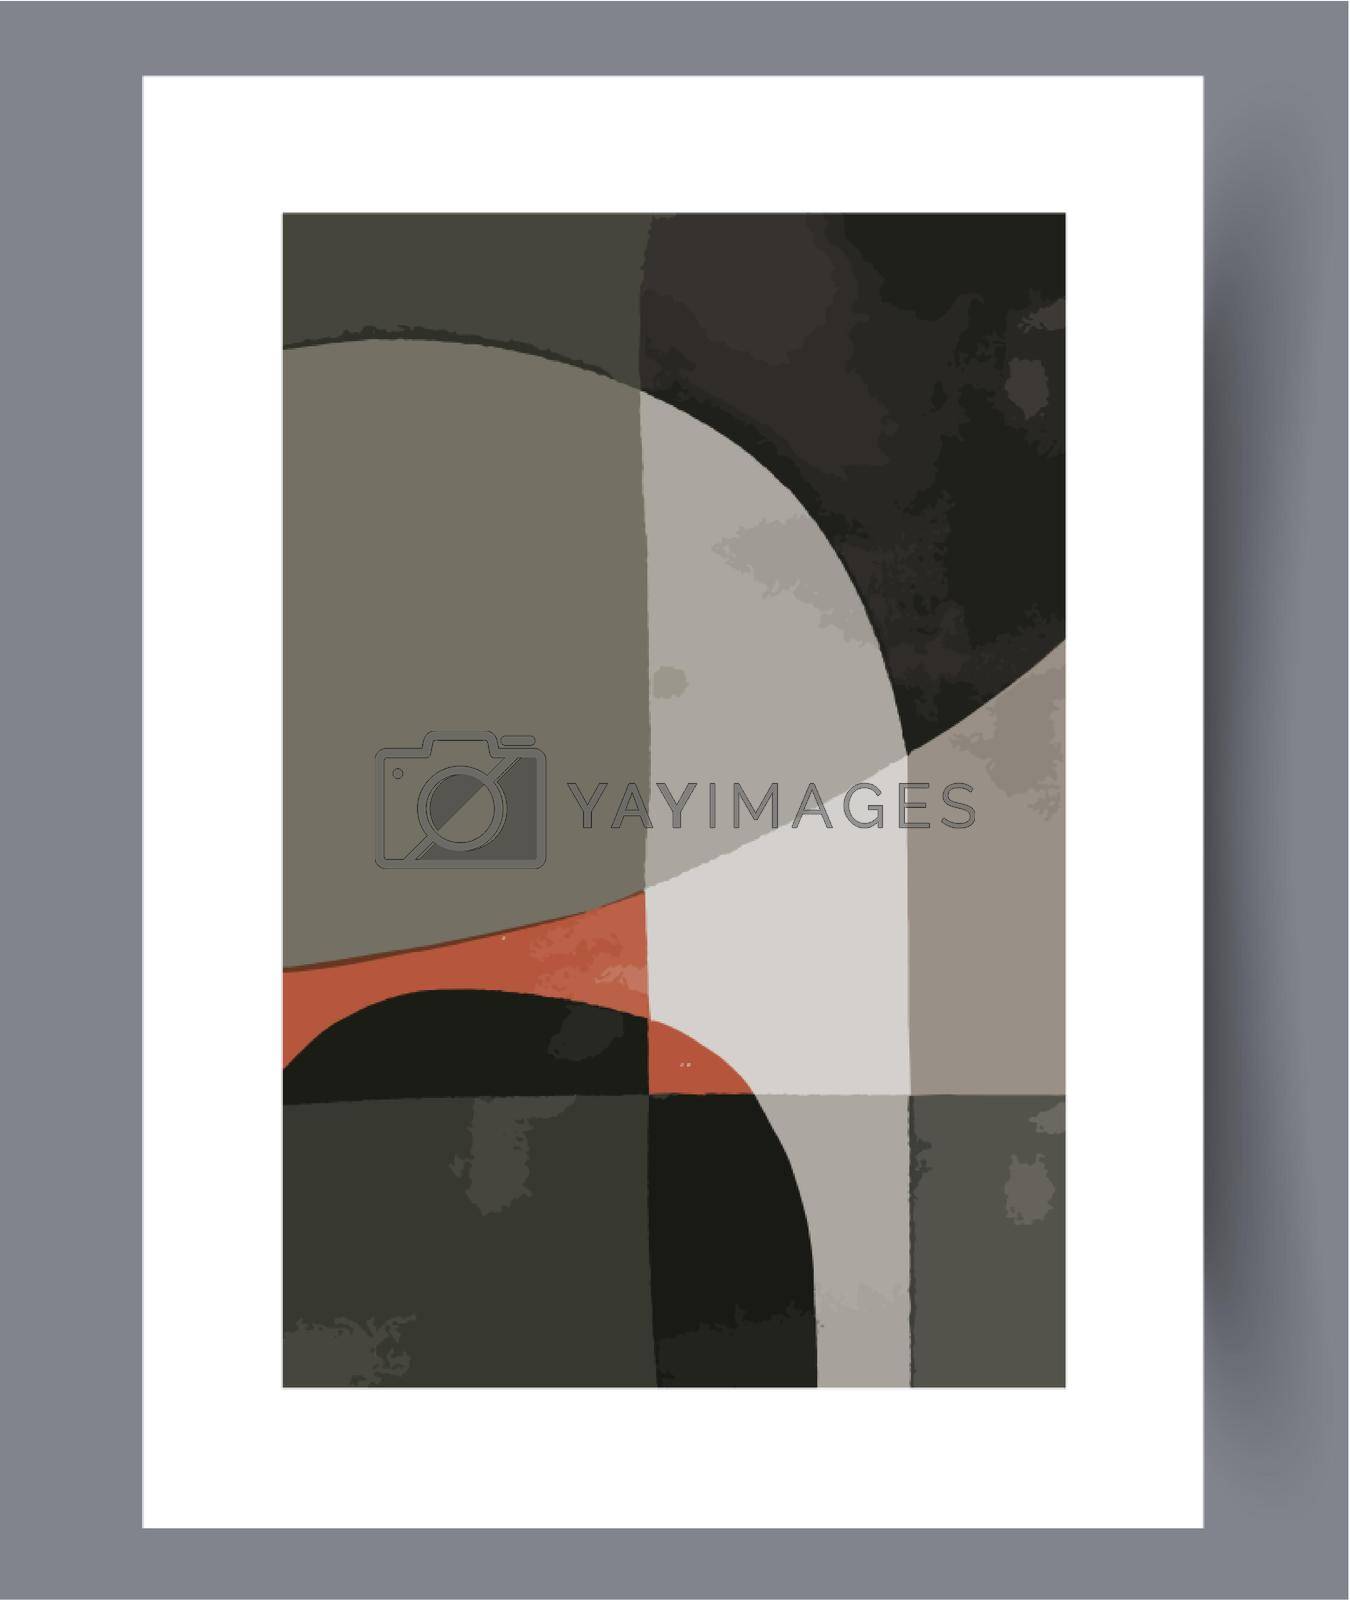 Royalty free image of Scandinavian abstract vector print. by aprint22com